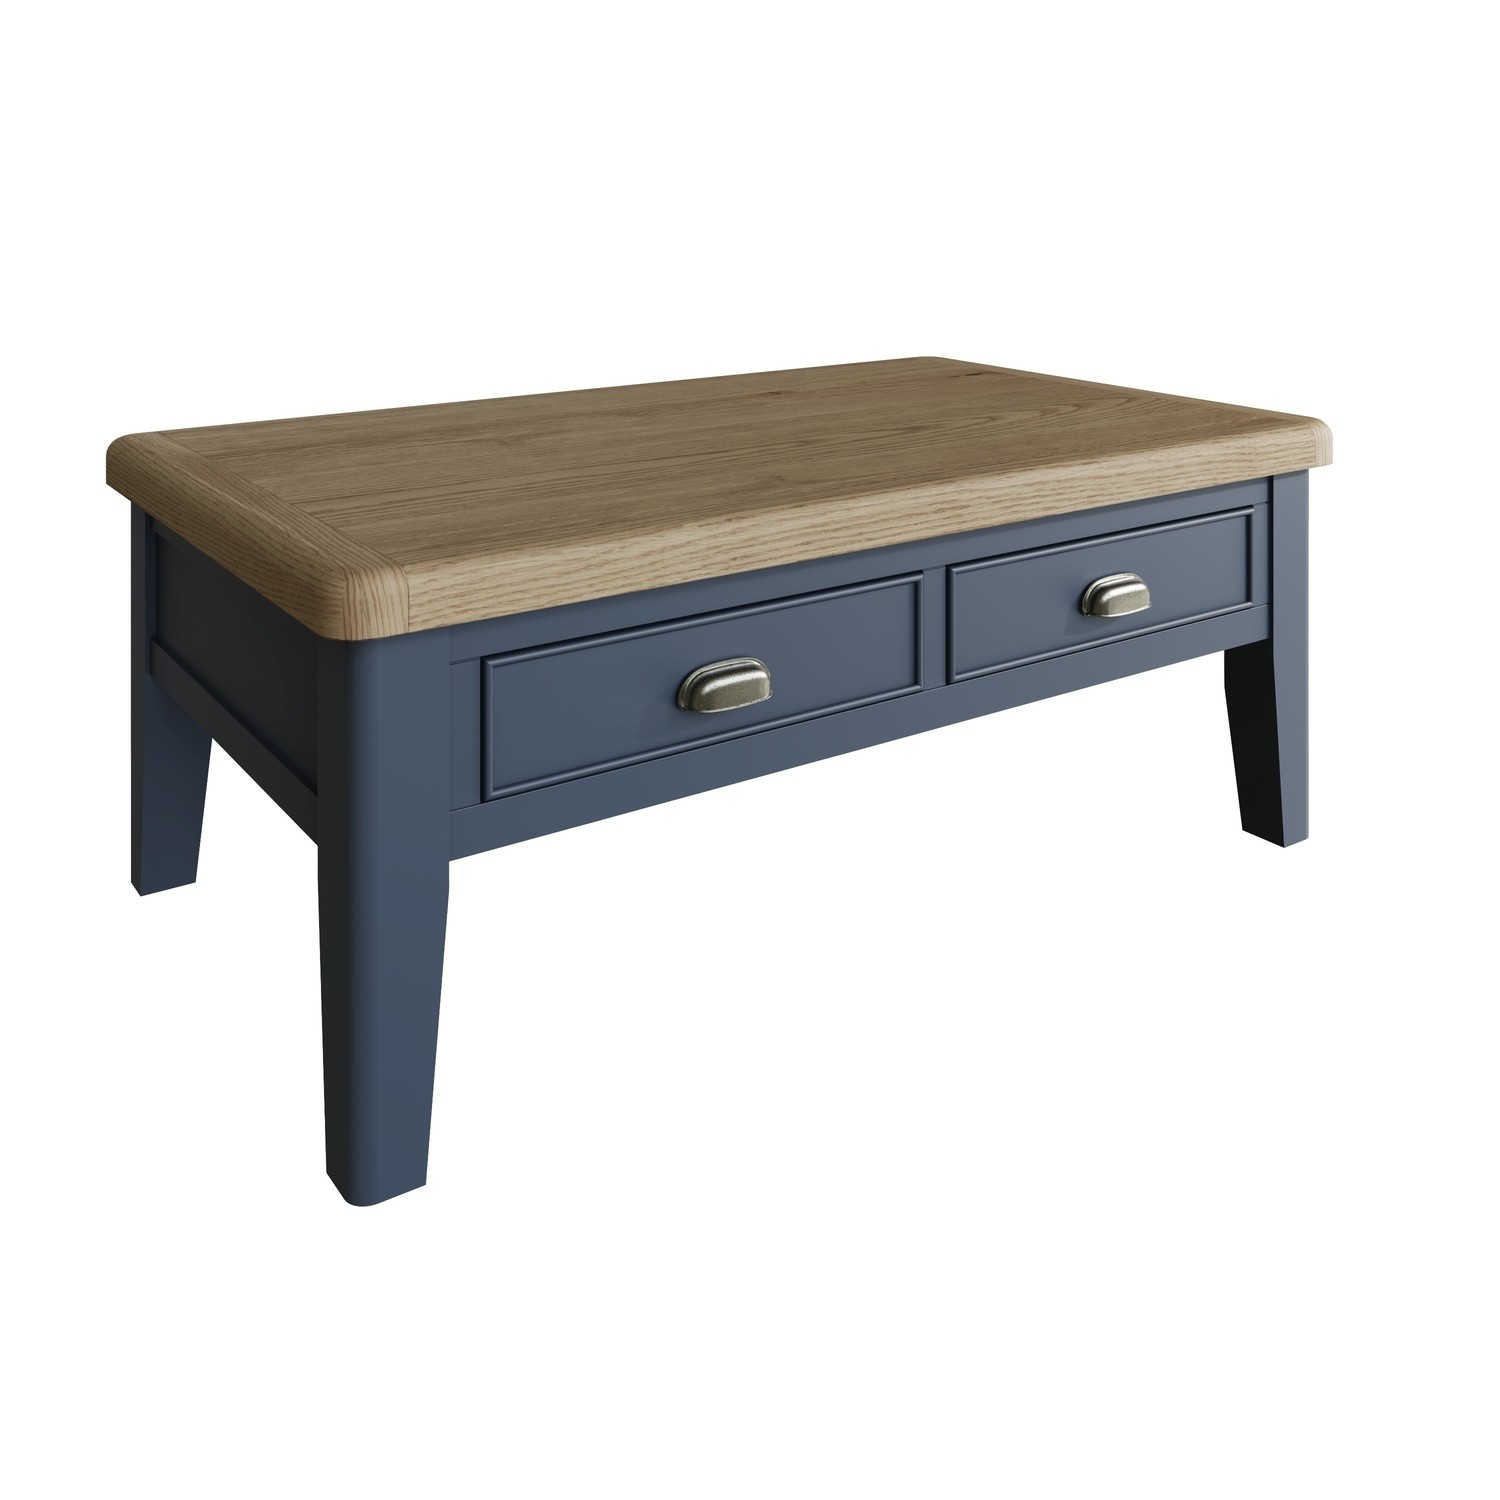 Read more about Oak & blue large coffee table 125cm